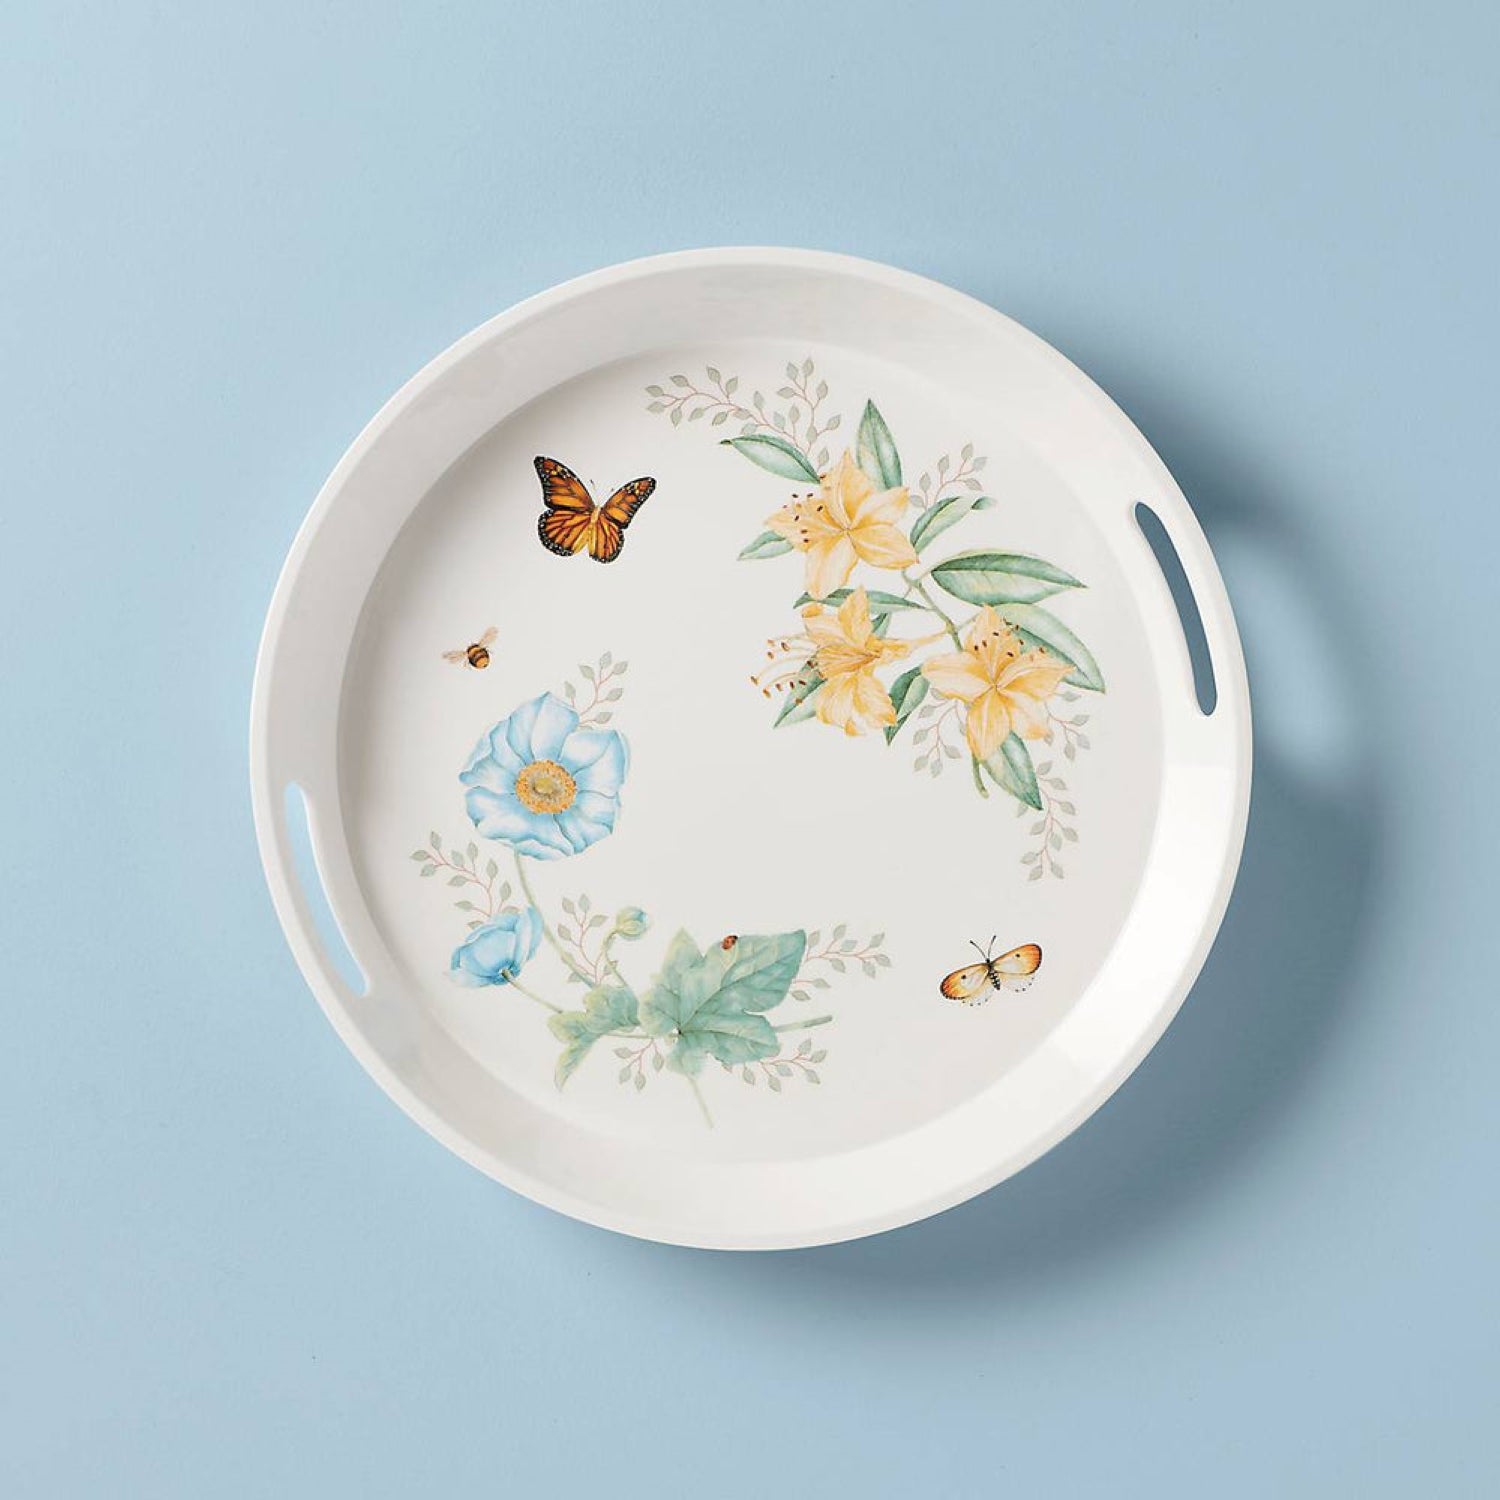 Butterfly Meadow Melamine Large Serving Bowl